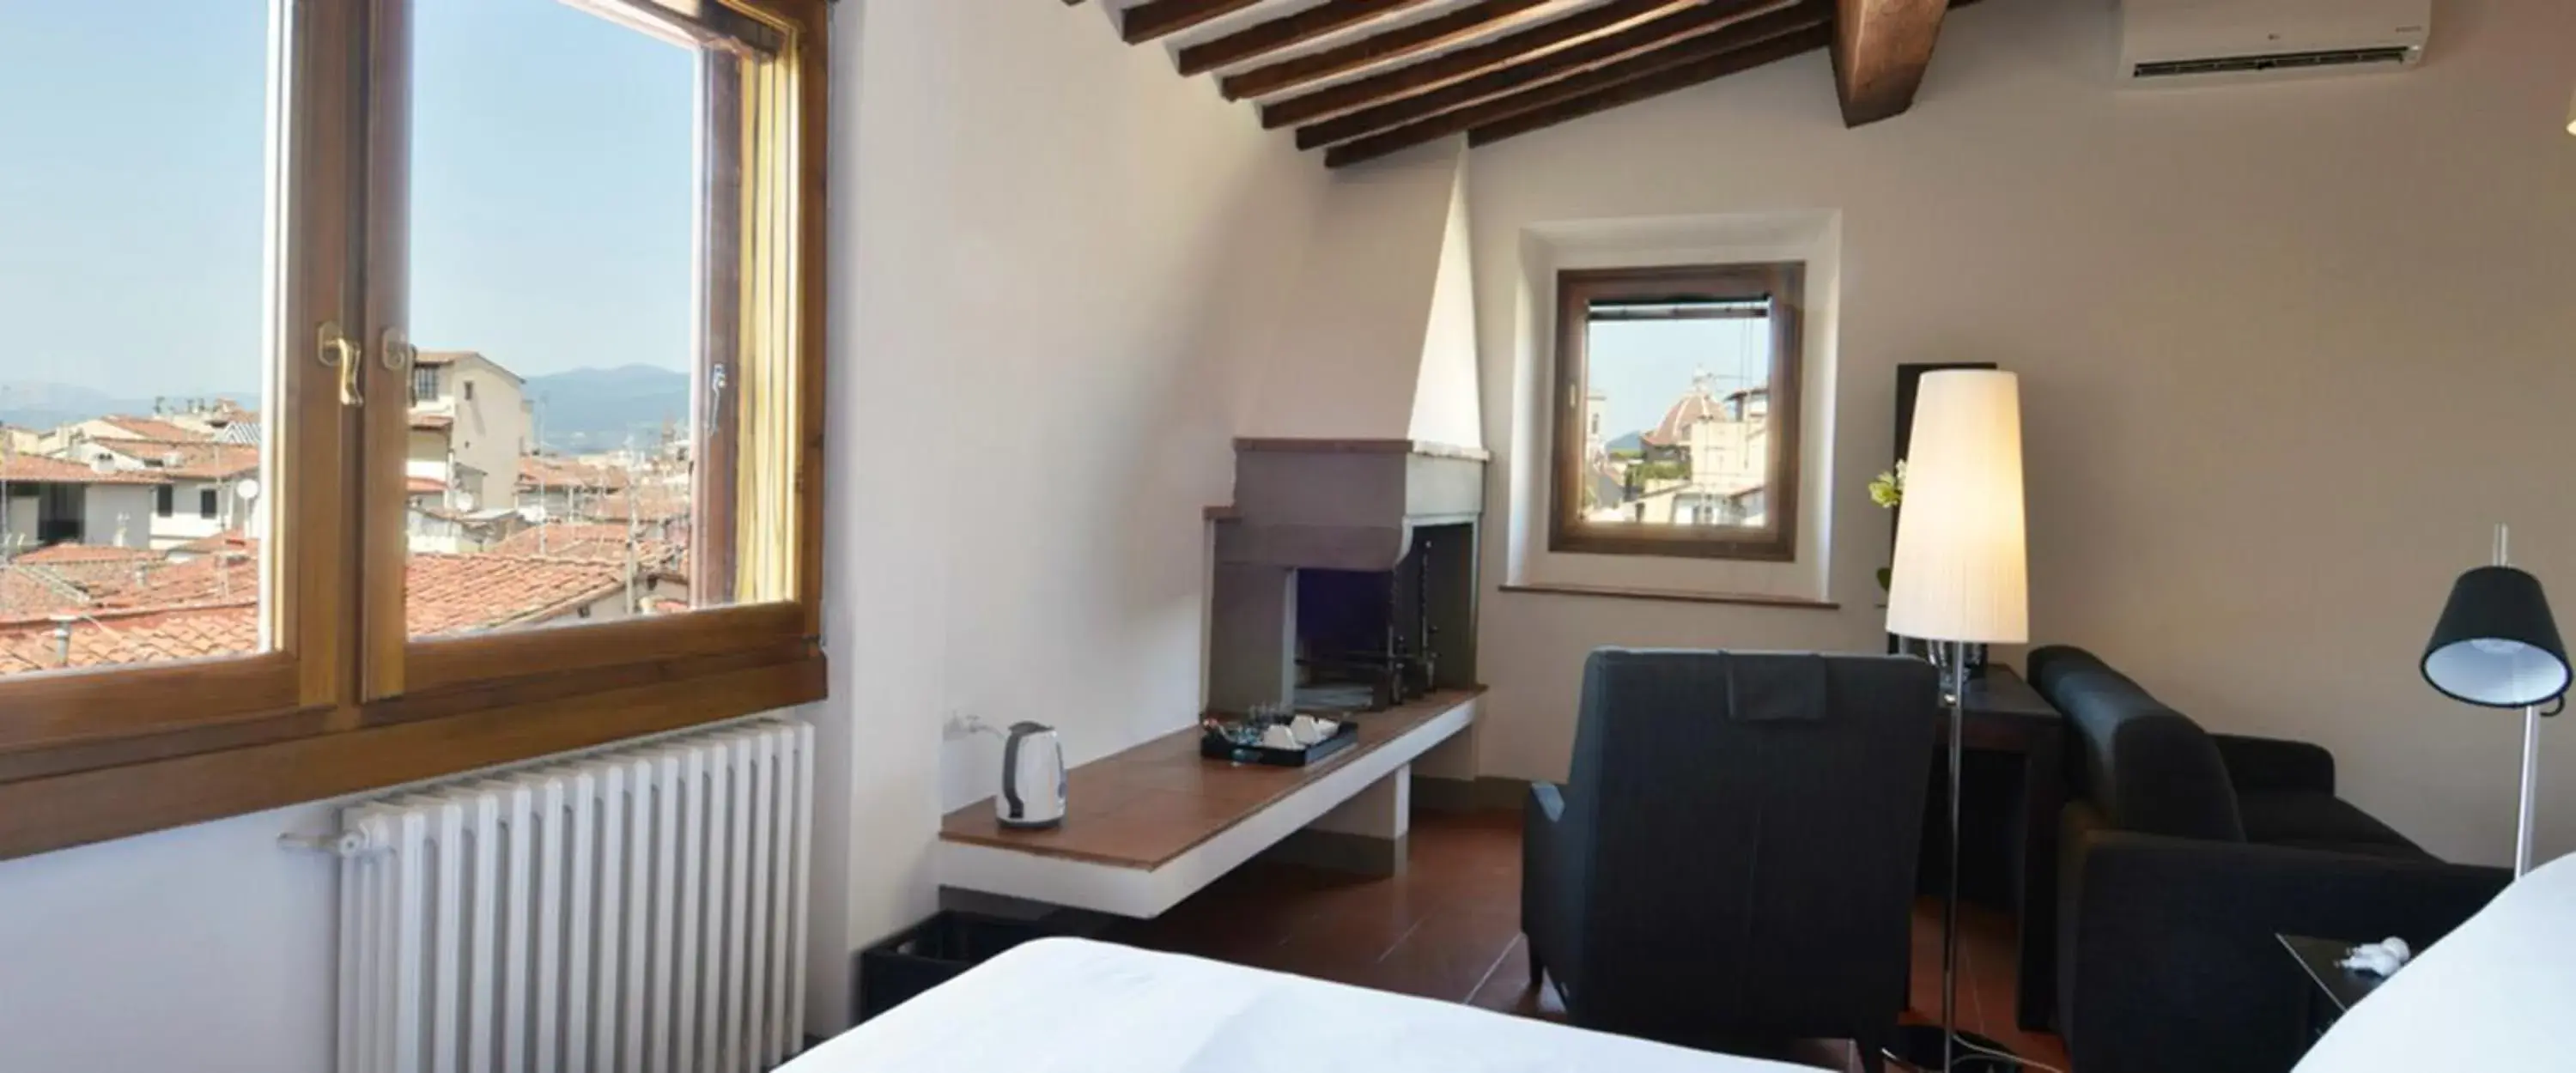 Suite with City View in Toscanelli Residenza d'Epoca